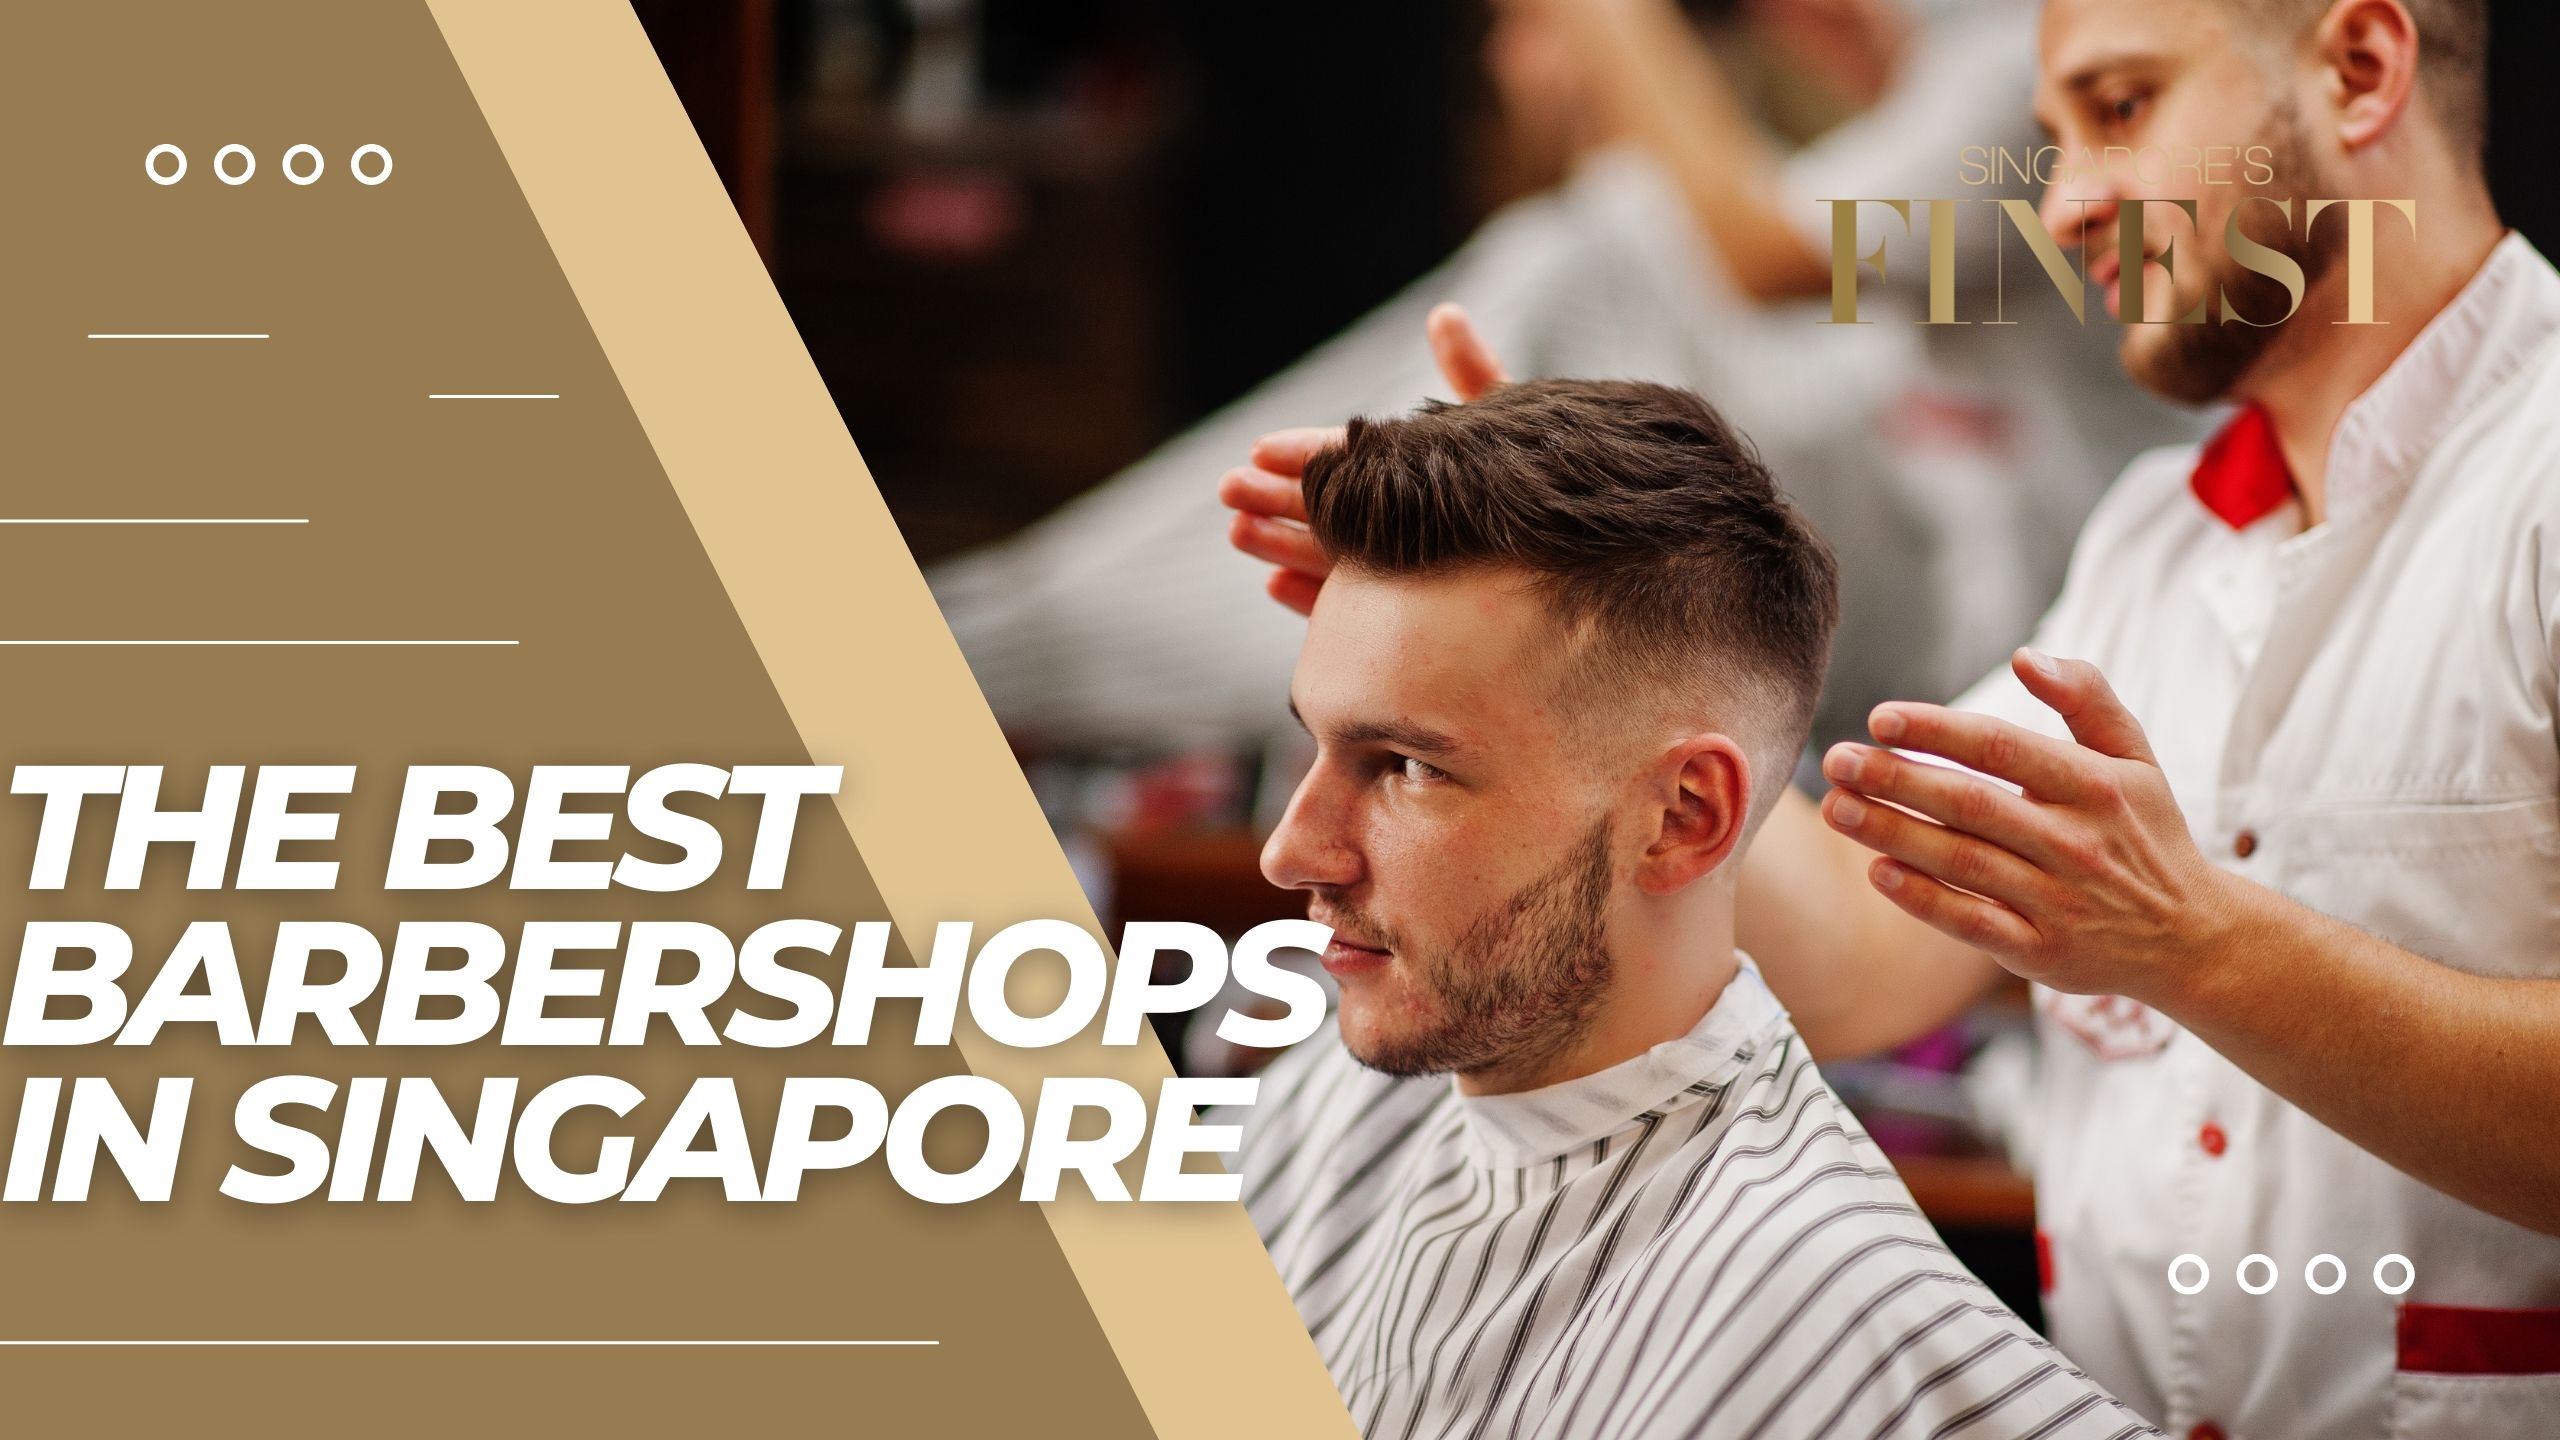 The Finest Barbershops in Singapore